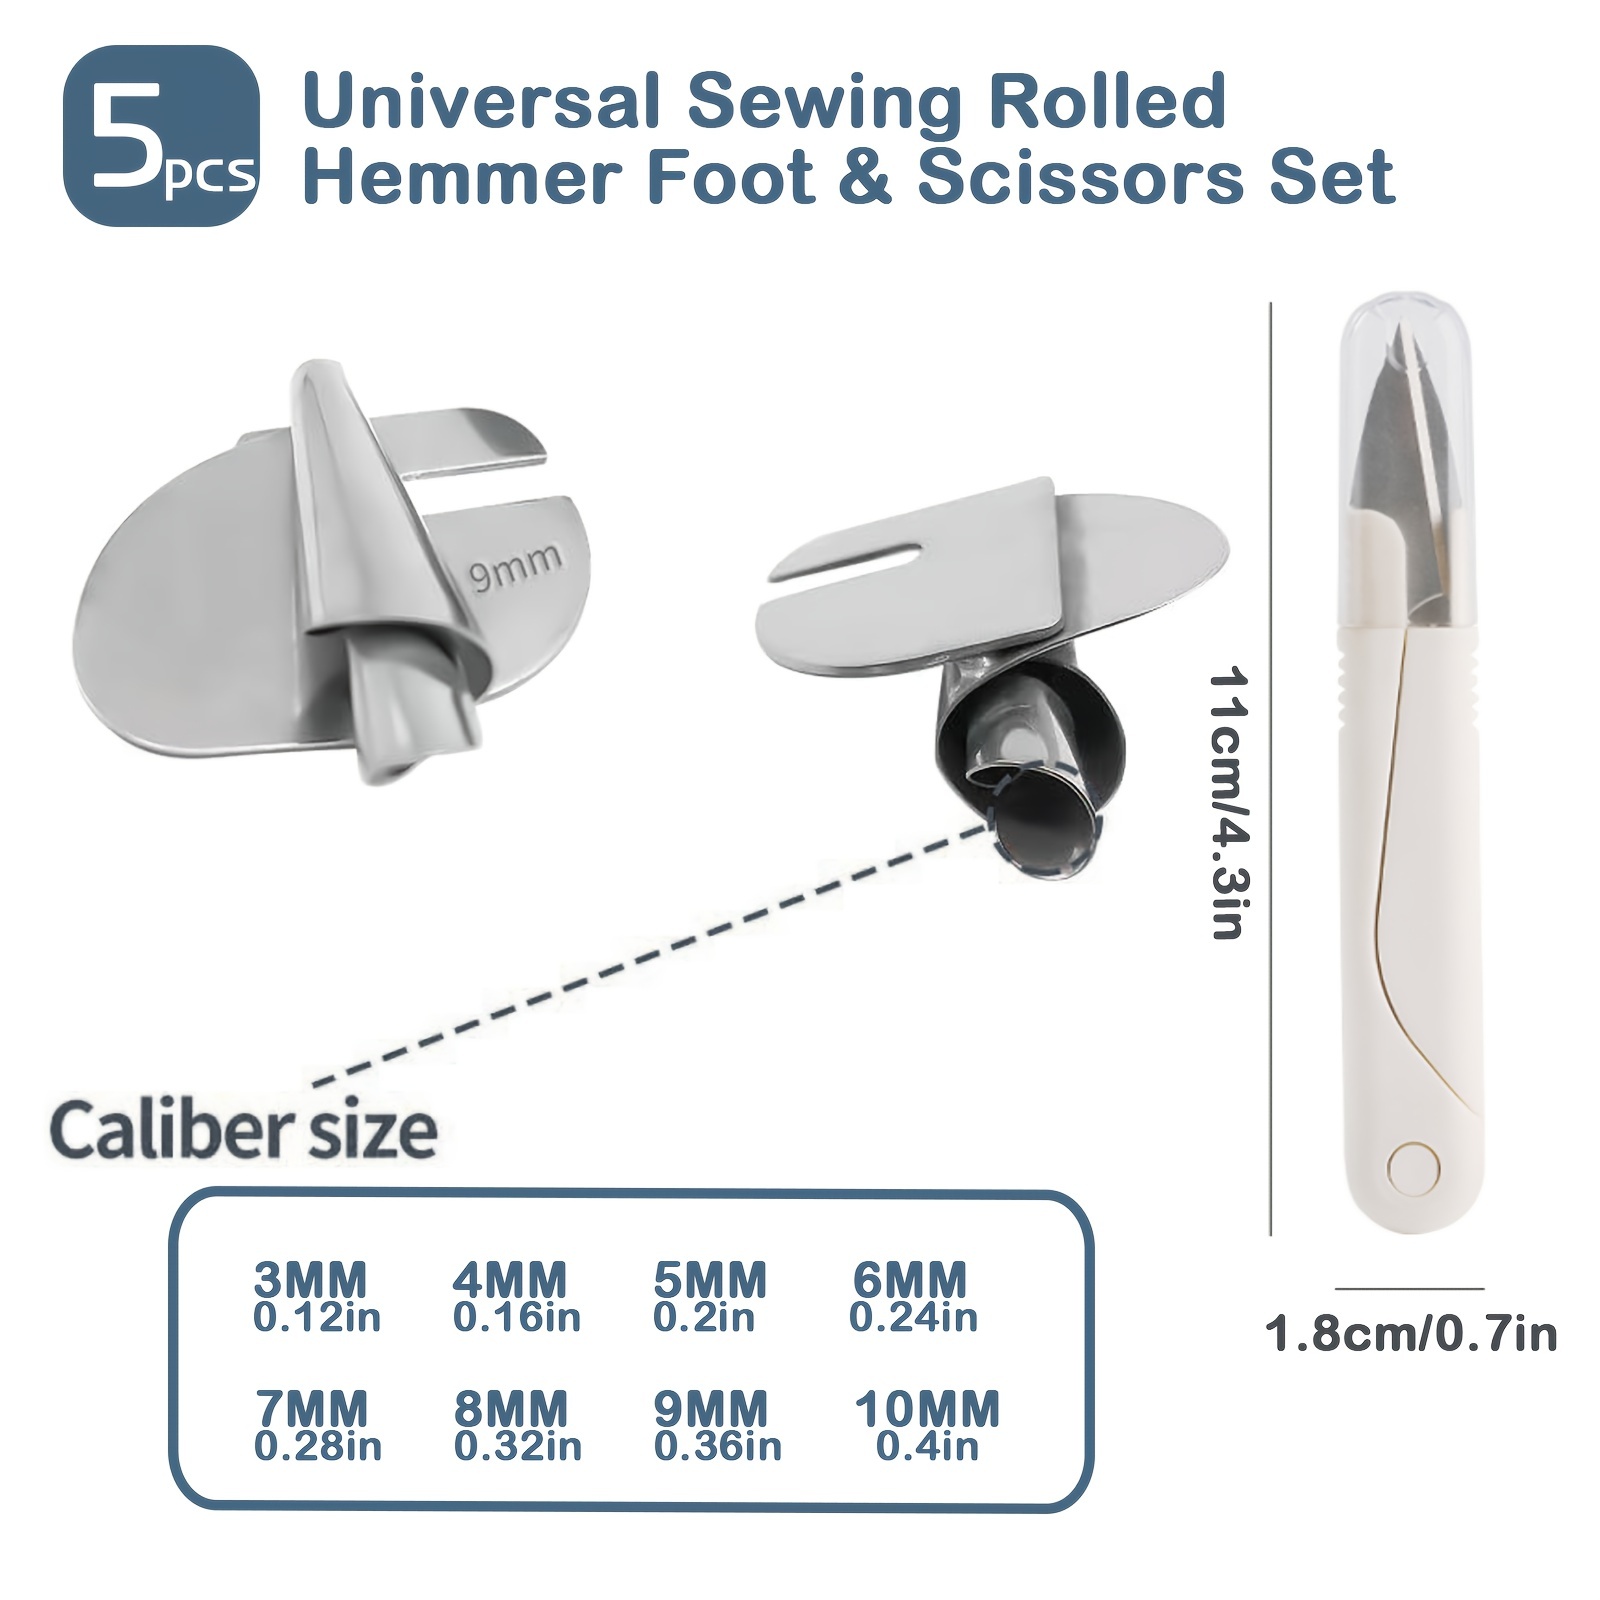  Sewing Rolled Hemmer Foot,4PCS Universal Sewing Rolled